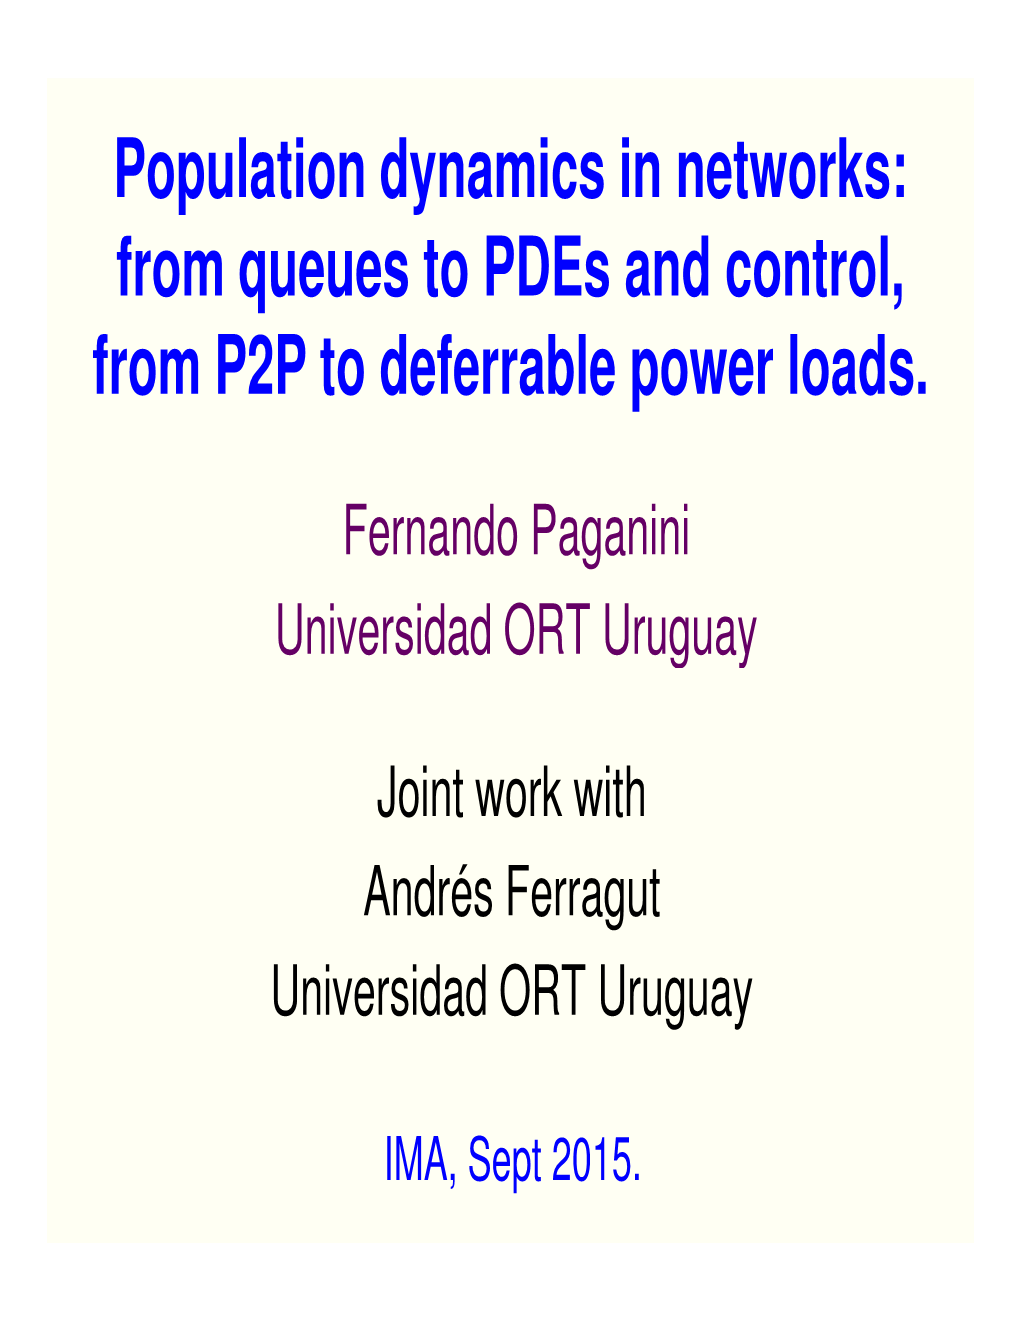 Population Dynamics in Networks: from Queues to Pdes and Control, from P2P to Deferrable Power Loads